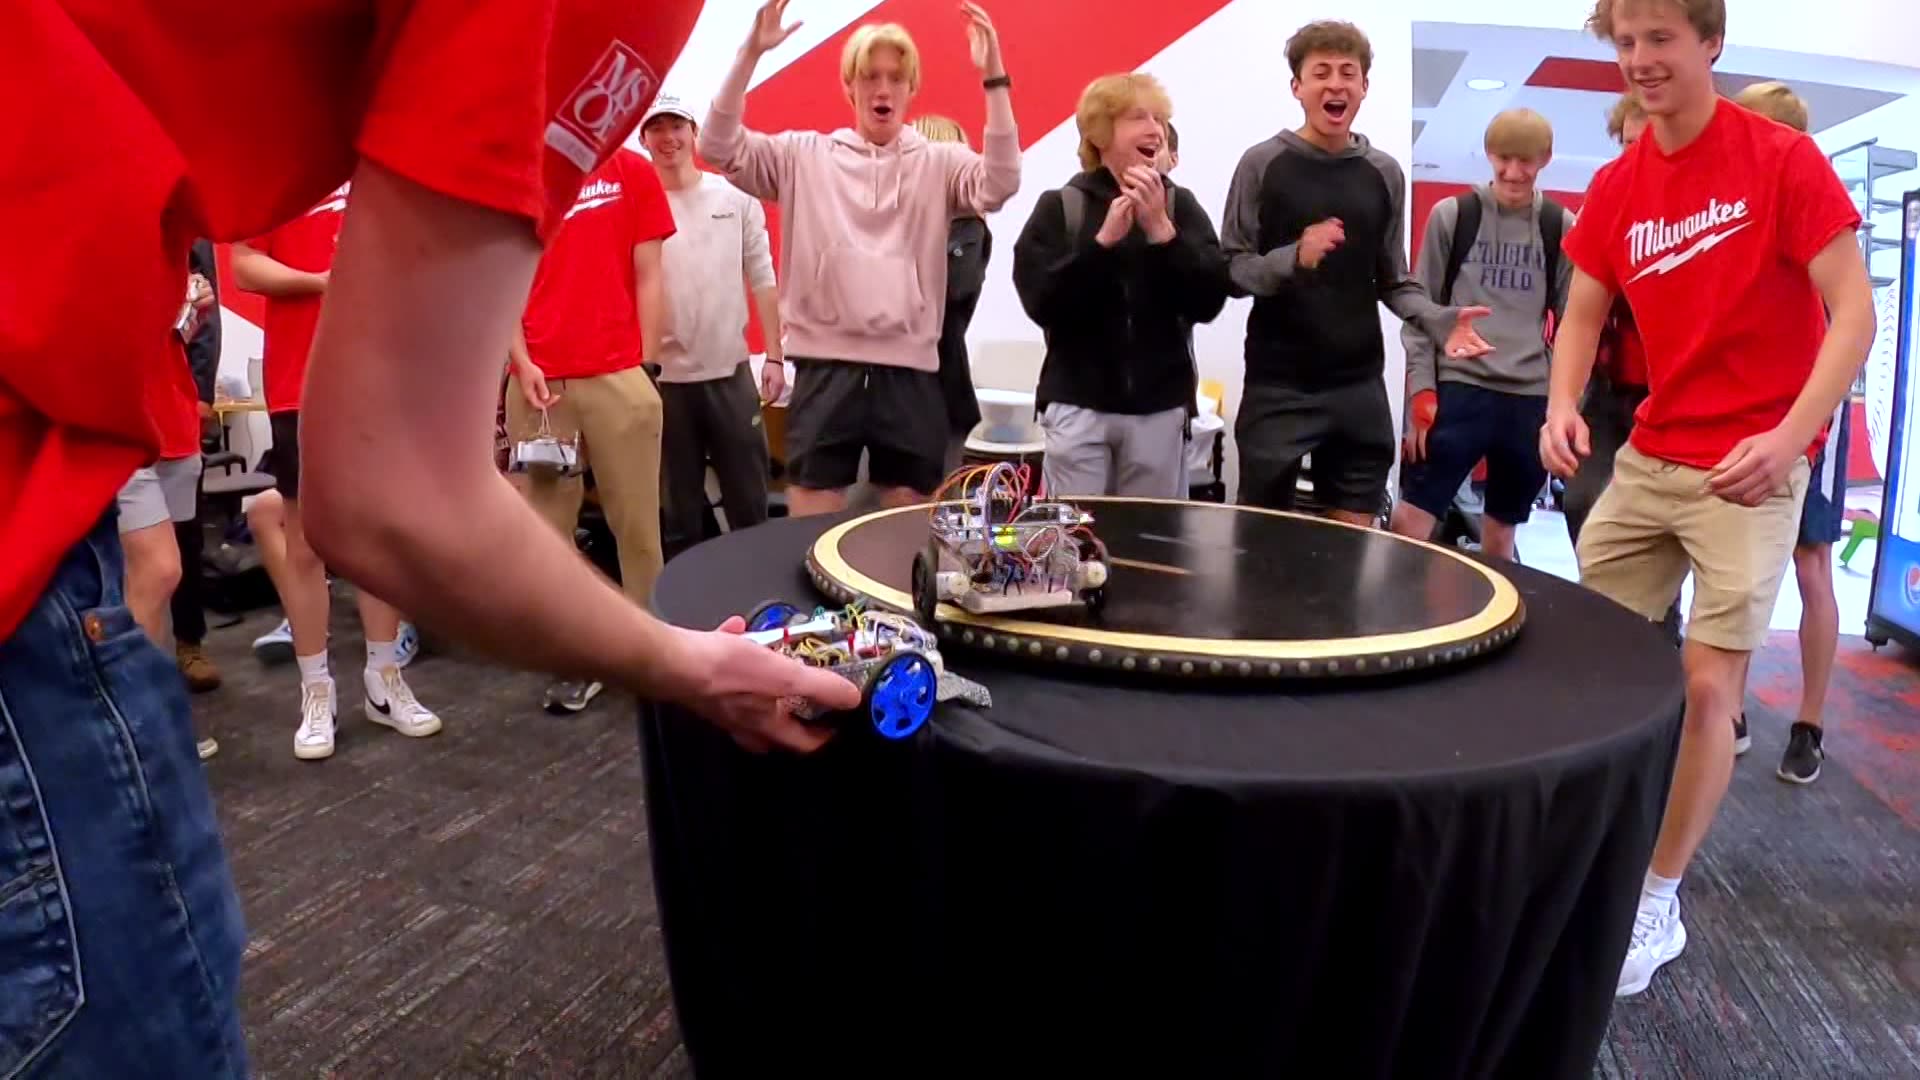 MSOE students design 'sumo robots' to compete in end-of-year tournament